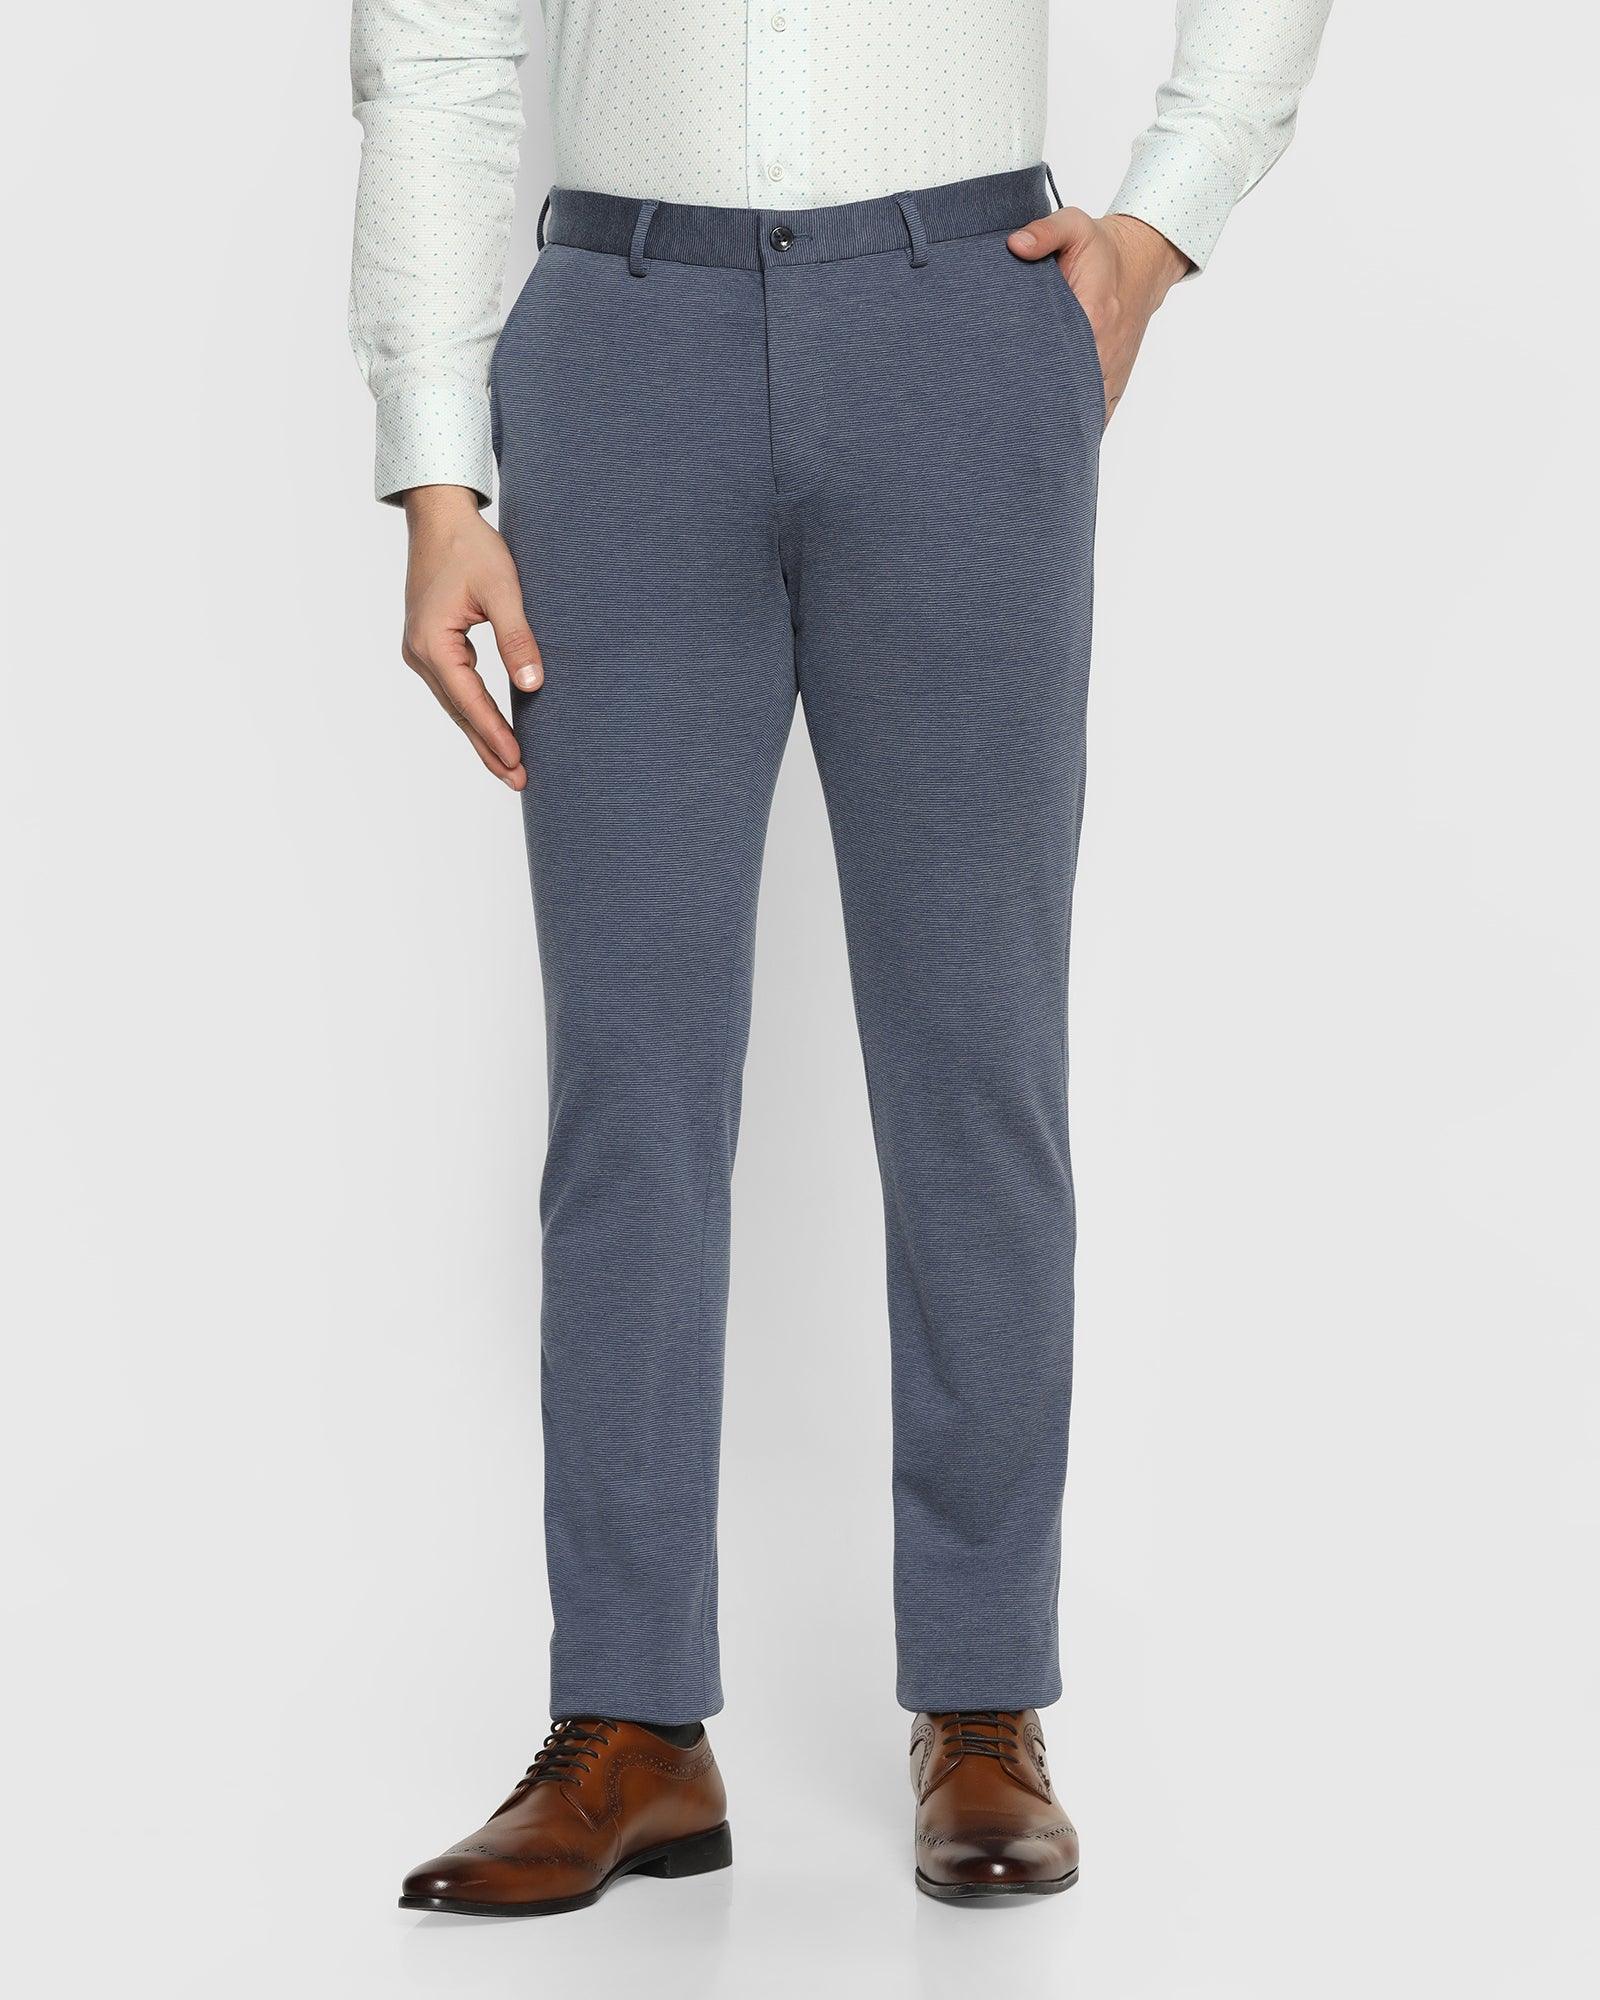 Slim Fit B-91 Formal Blue Textured Trouser - Reflect